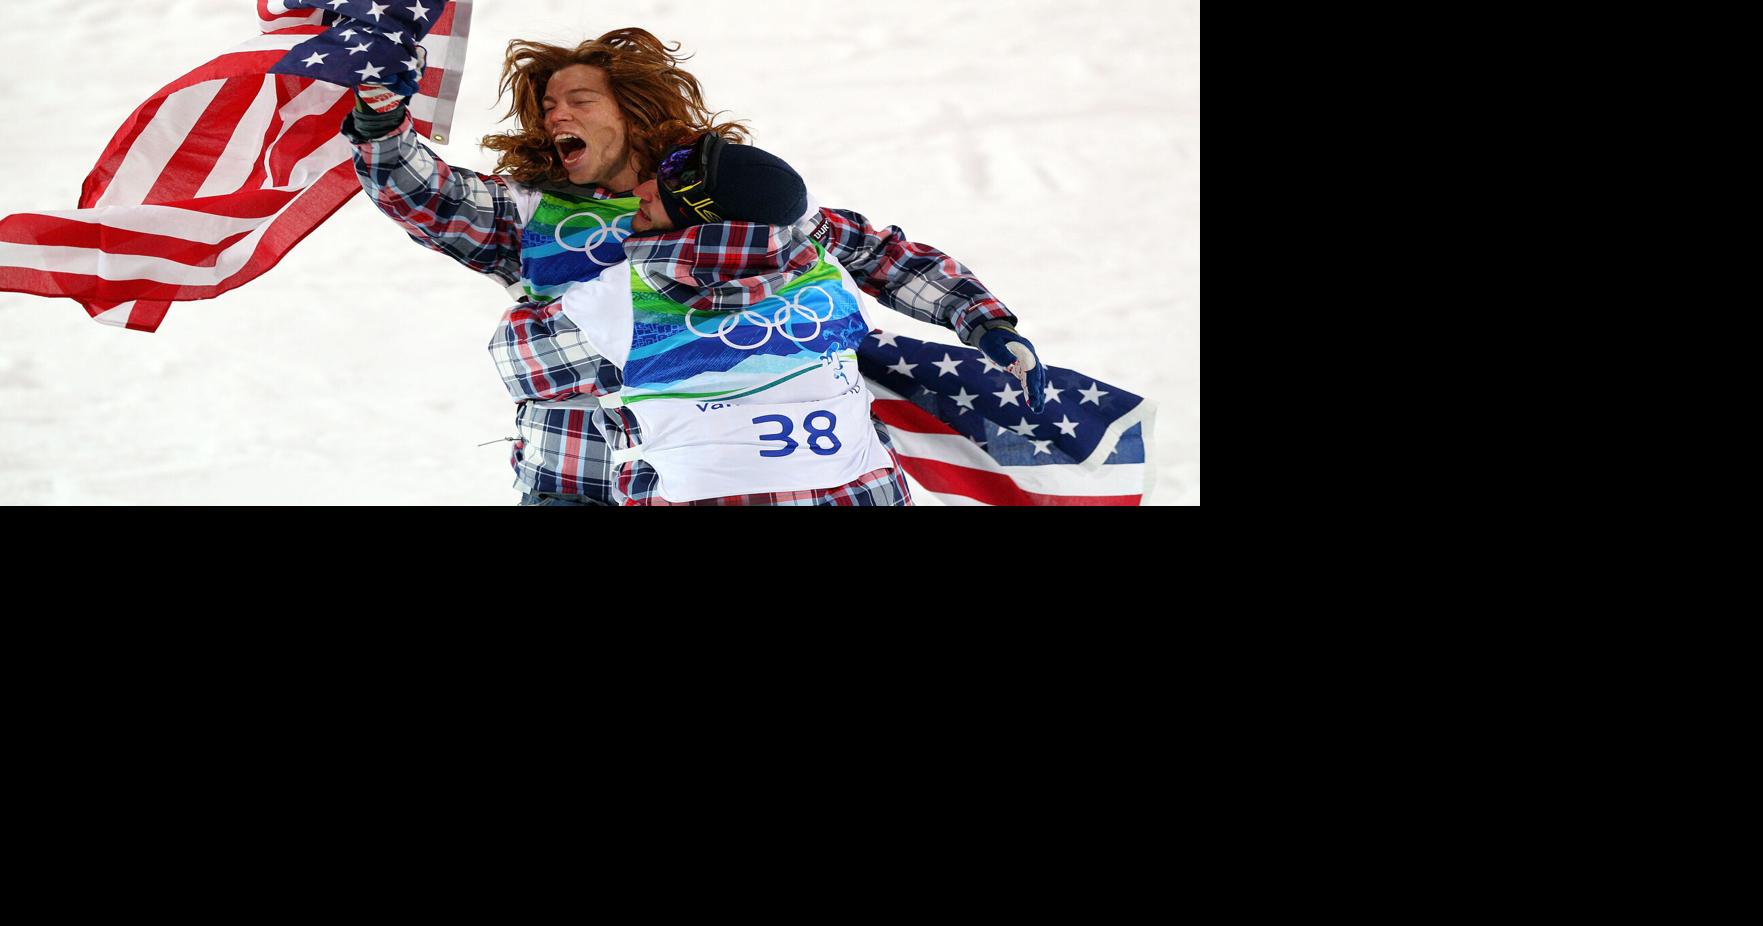 Usa Shaun White, 2006 Winter Olympics Sports Illustrated Cover by